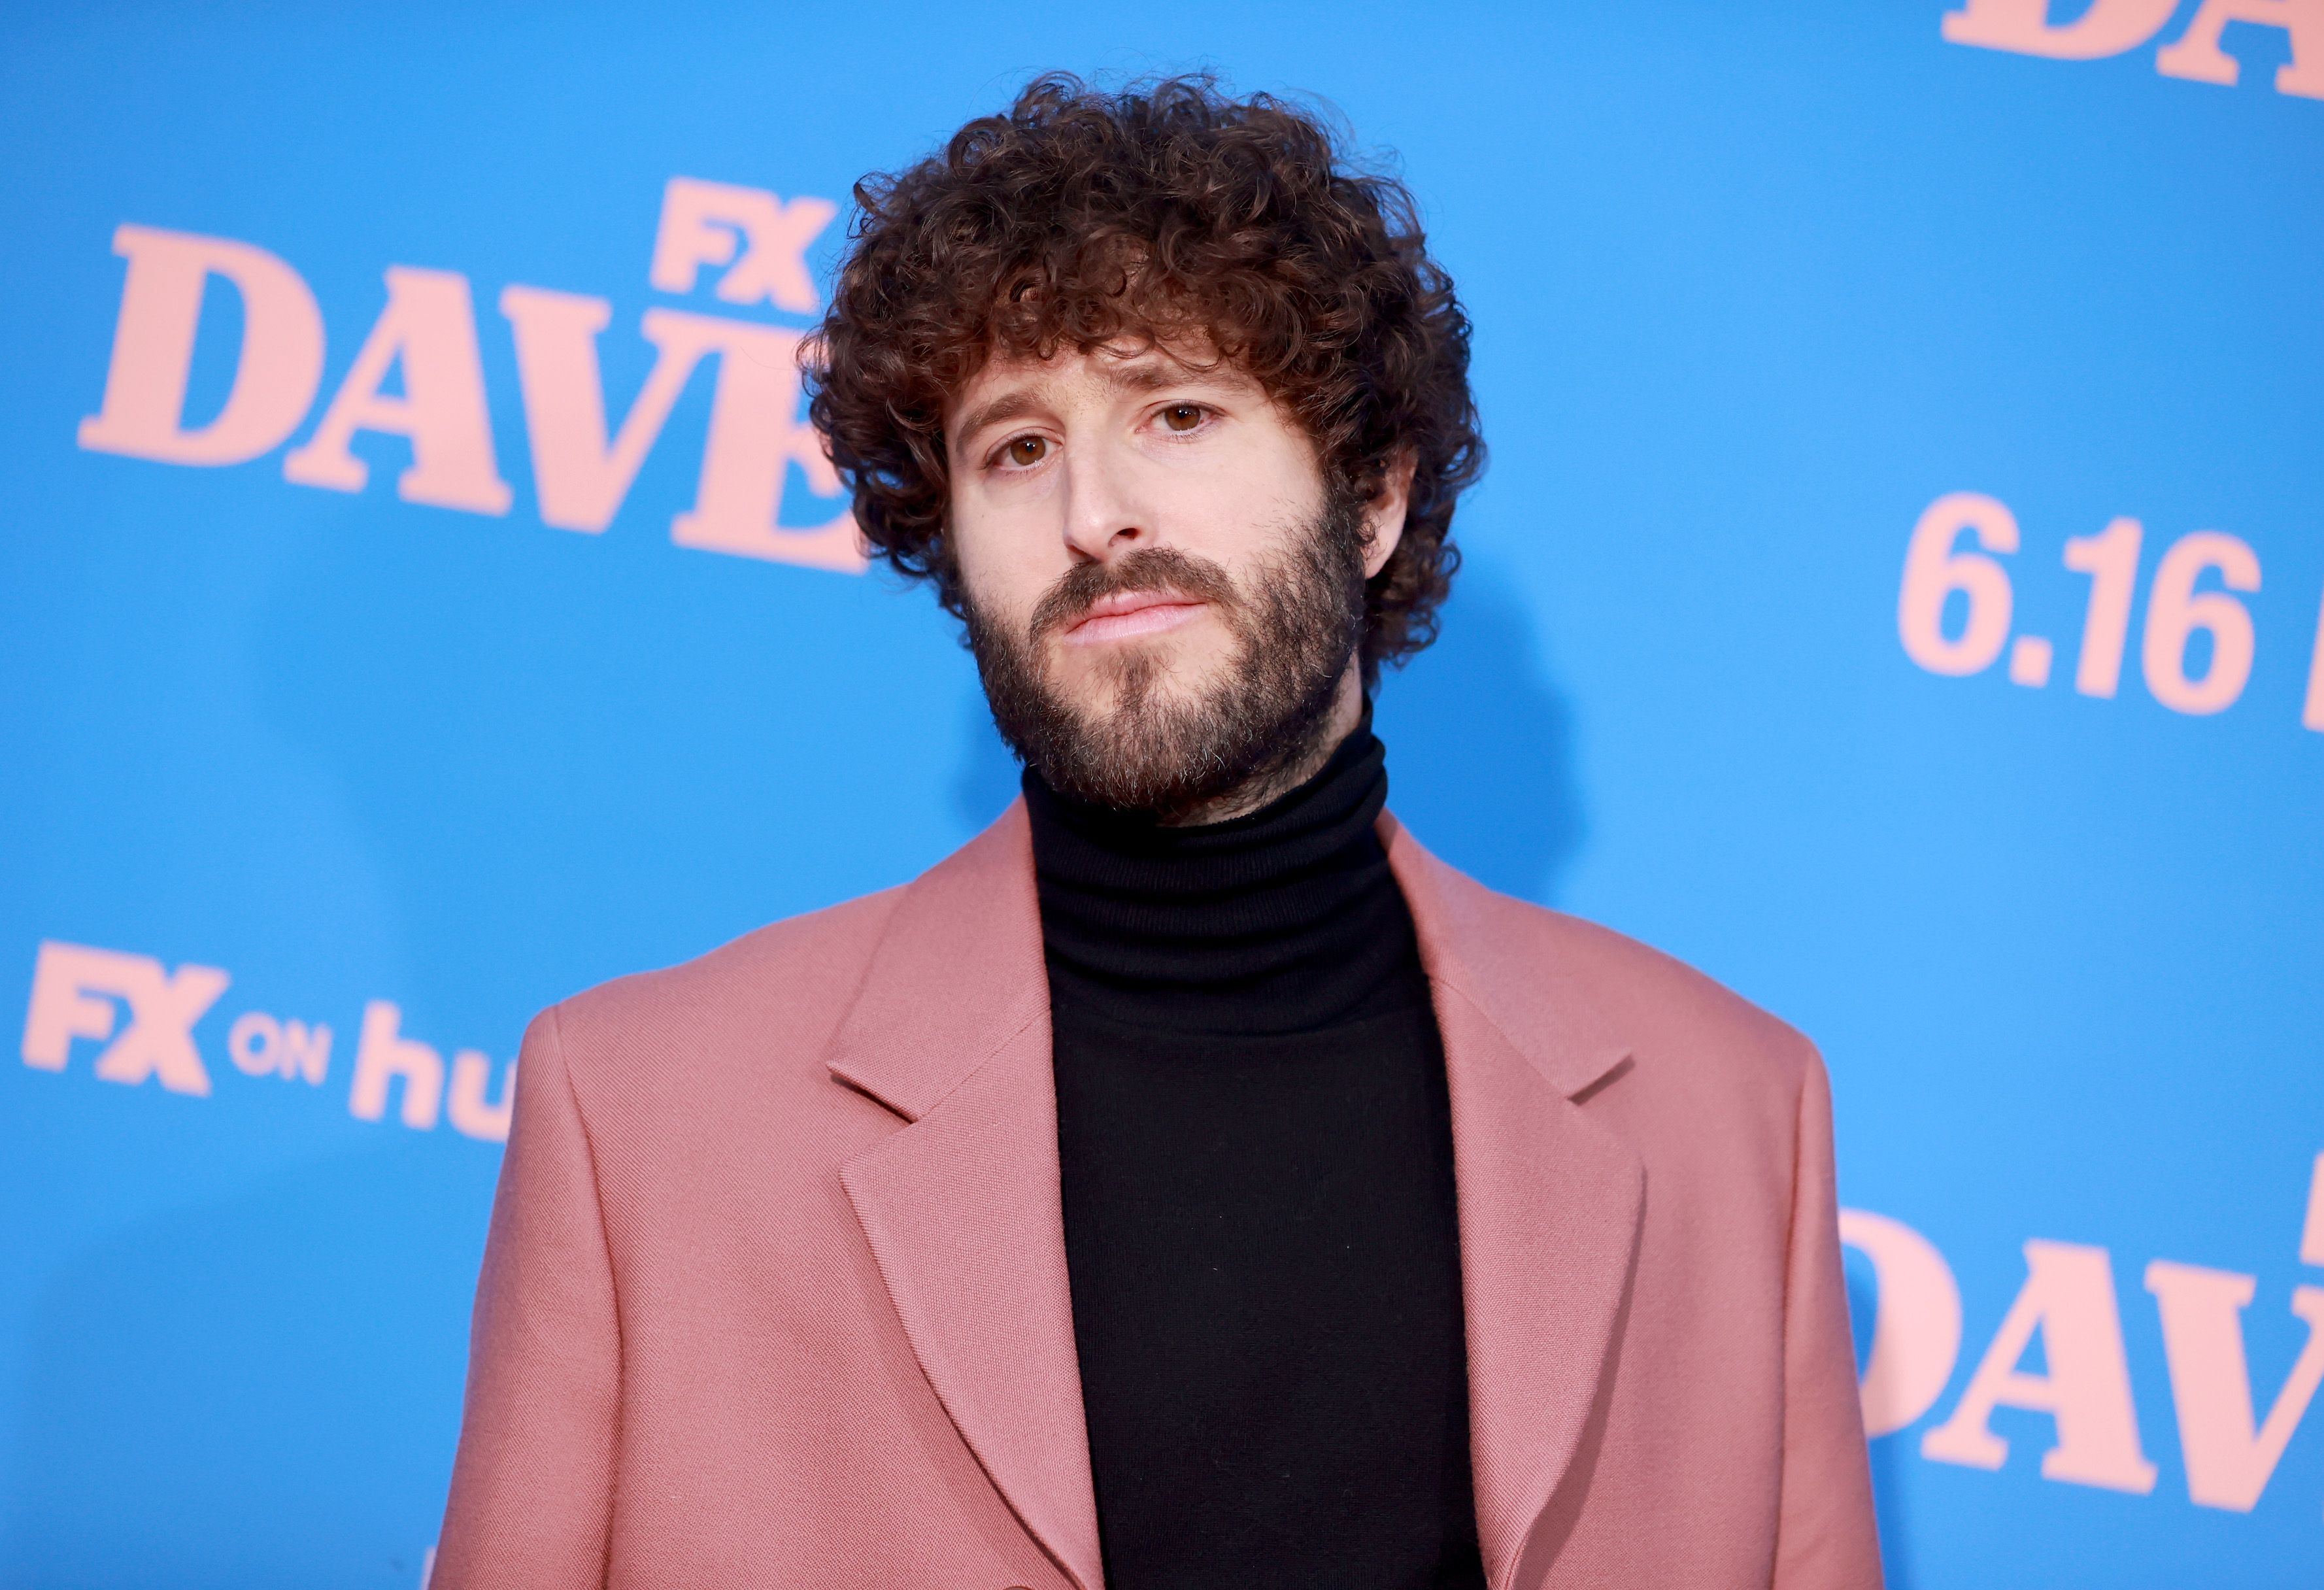 Dave 'Lil Dicky' Burd attends FXX, FX and Hulu's Season 2 Red Carpet Premiere Of 'Dave'